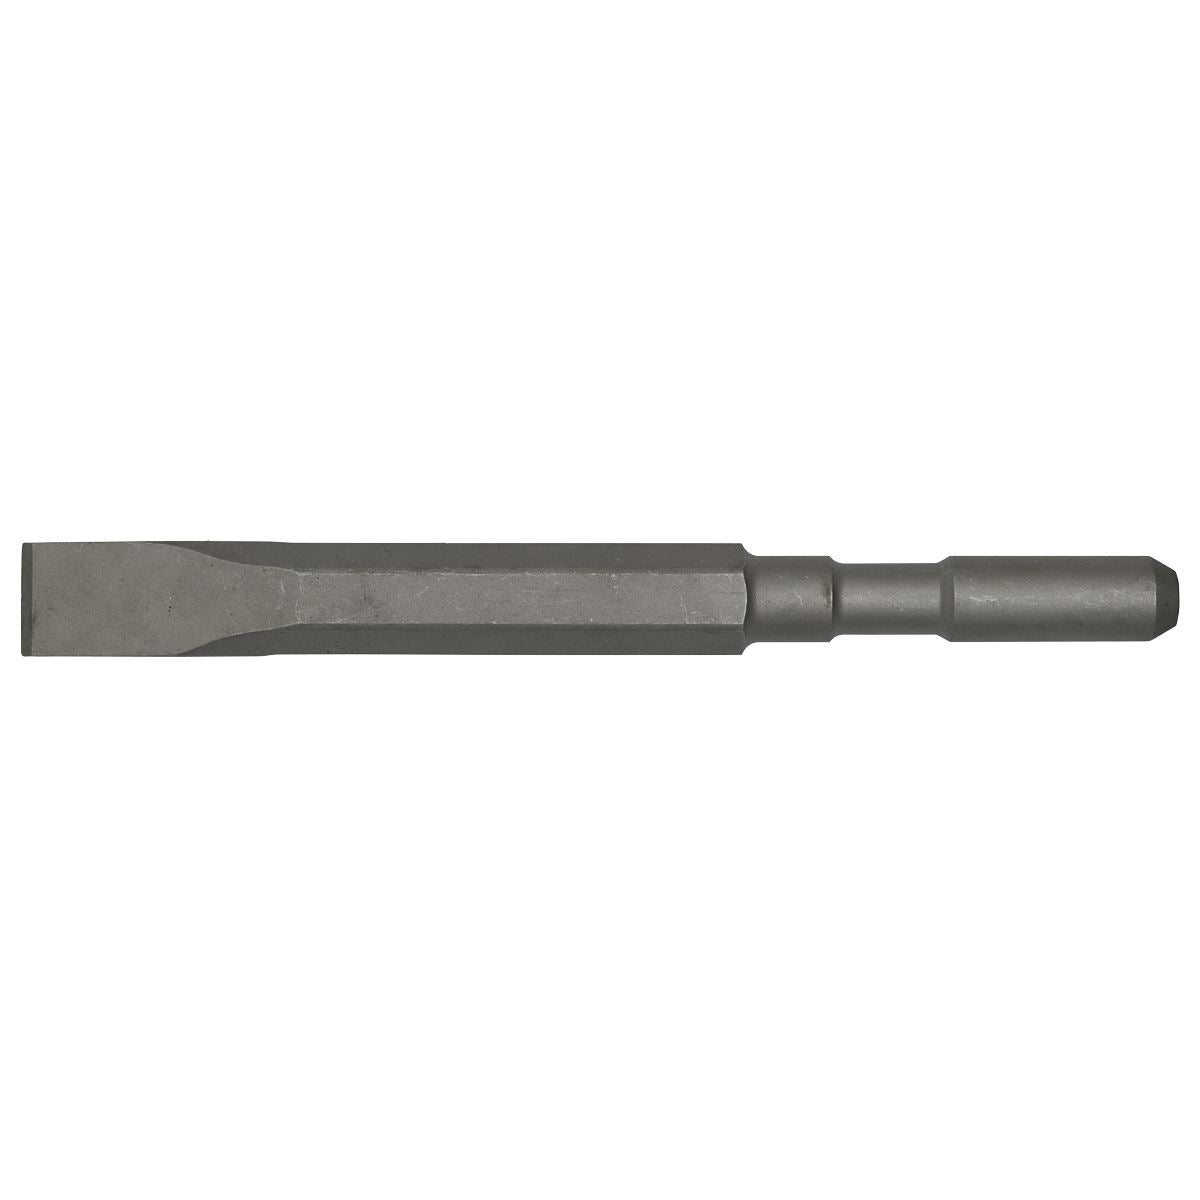 Worksafe by Sealey Chisel 25 x 250mm - CP9